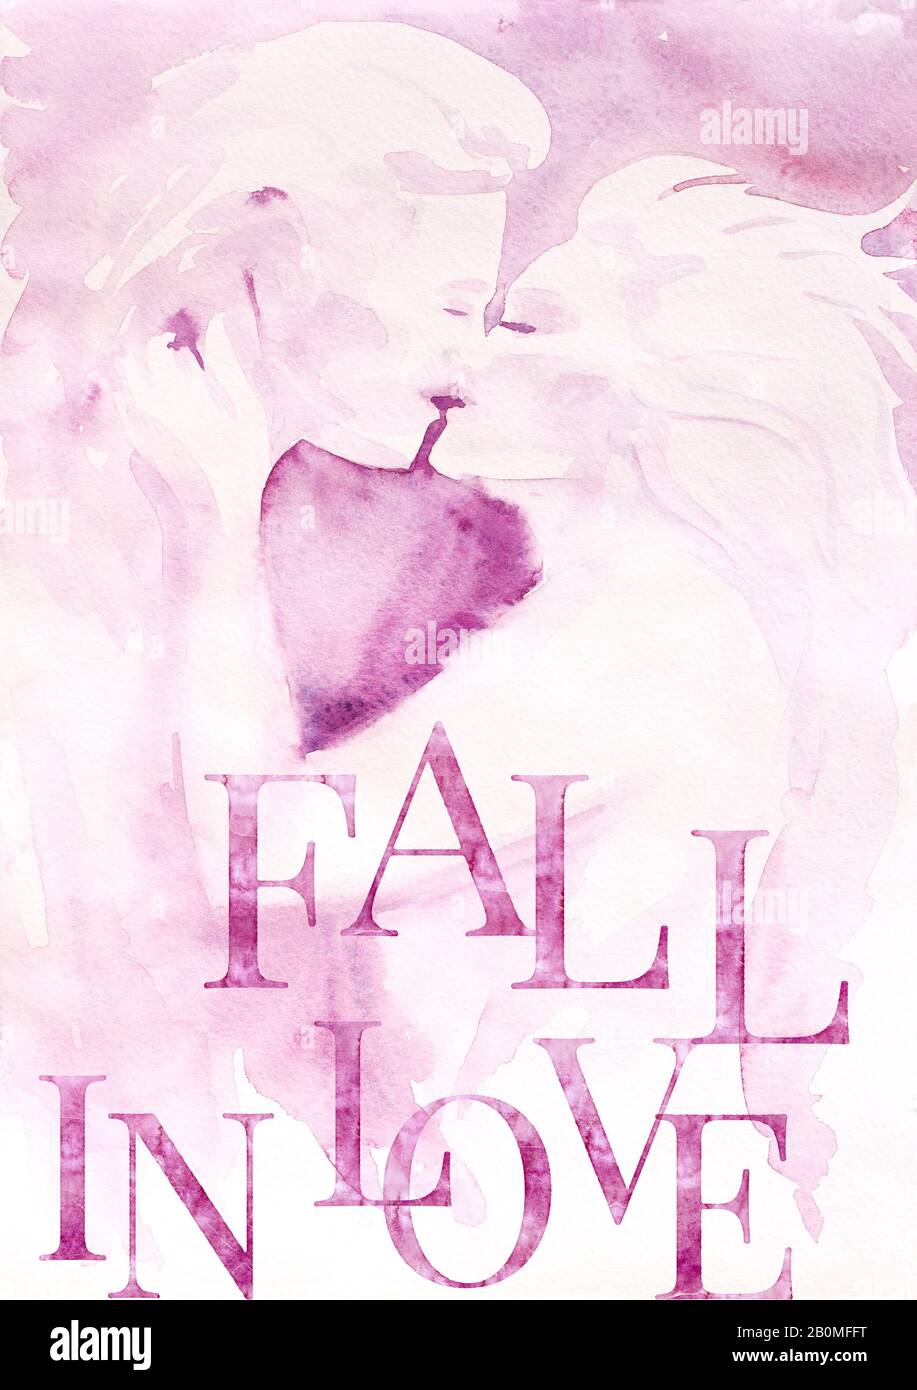 Fall in Love. Couple in Love Kiss. Romantic. Secret Life. Big Love. Watercolor Big Letters. Pre-made Composition. Print quality. White background. Stock Photo